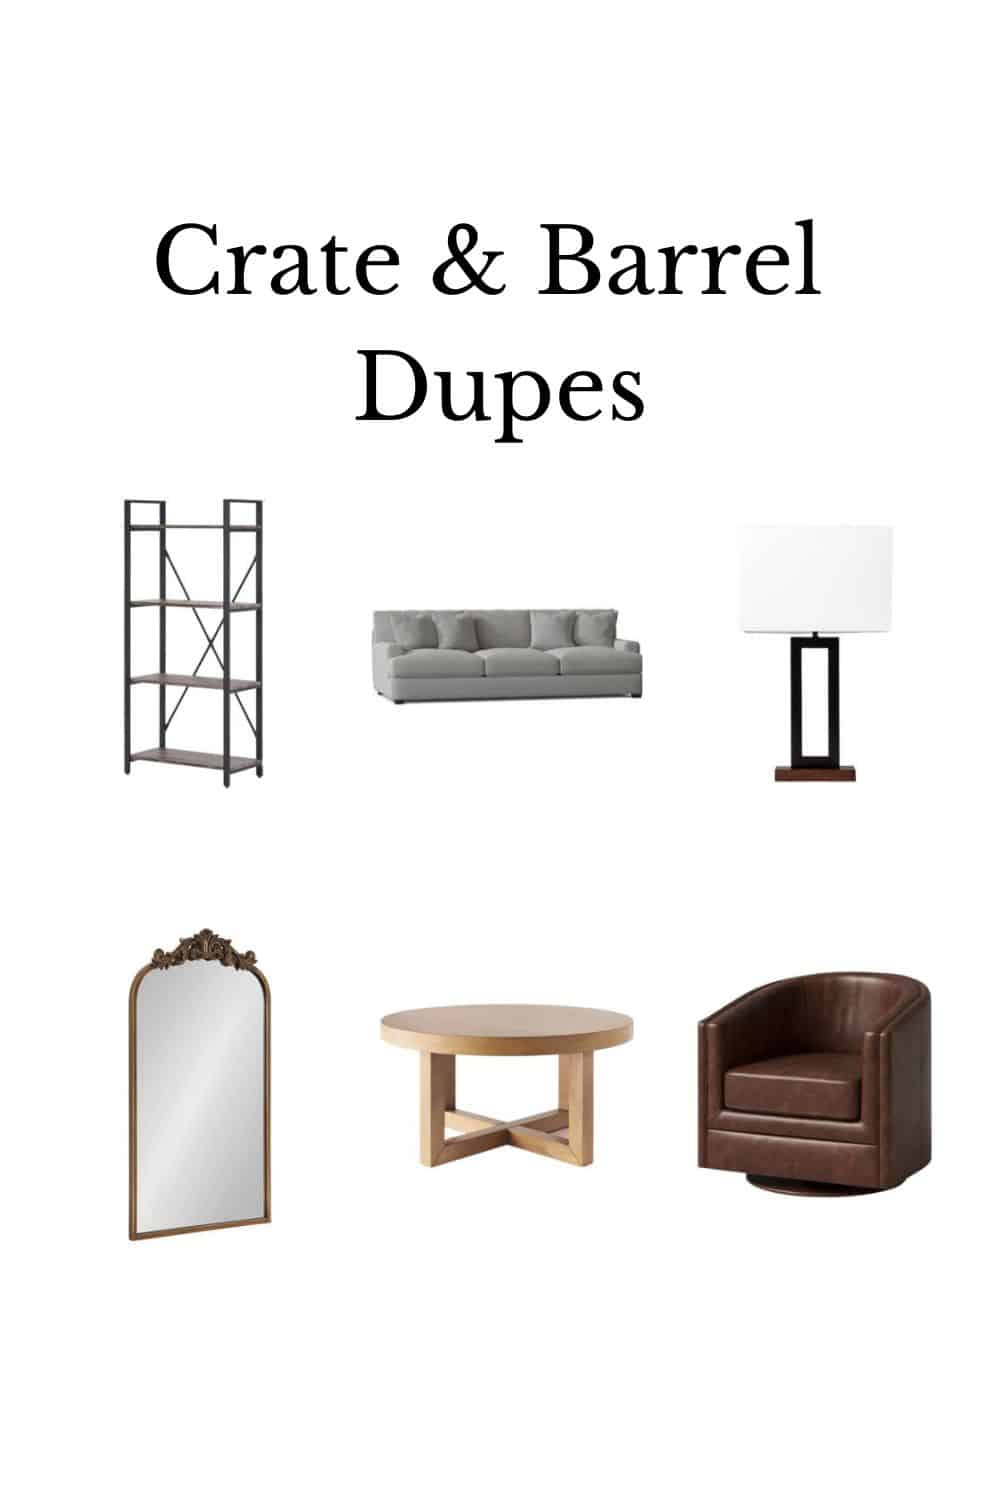 ANTHROPOLOGIE DUPES, CRATE AND BARREL COPYCATS, AND SERENA AND